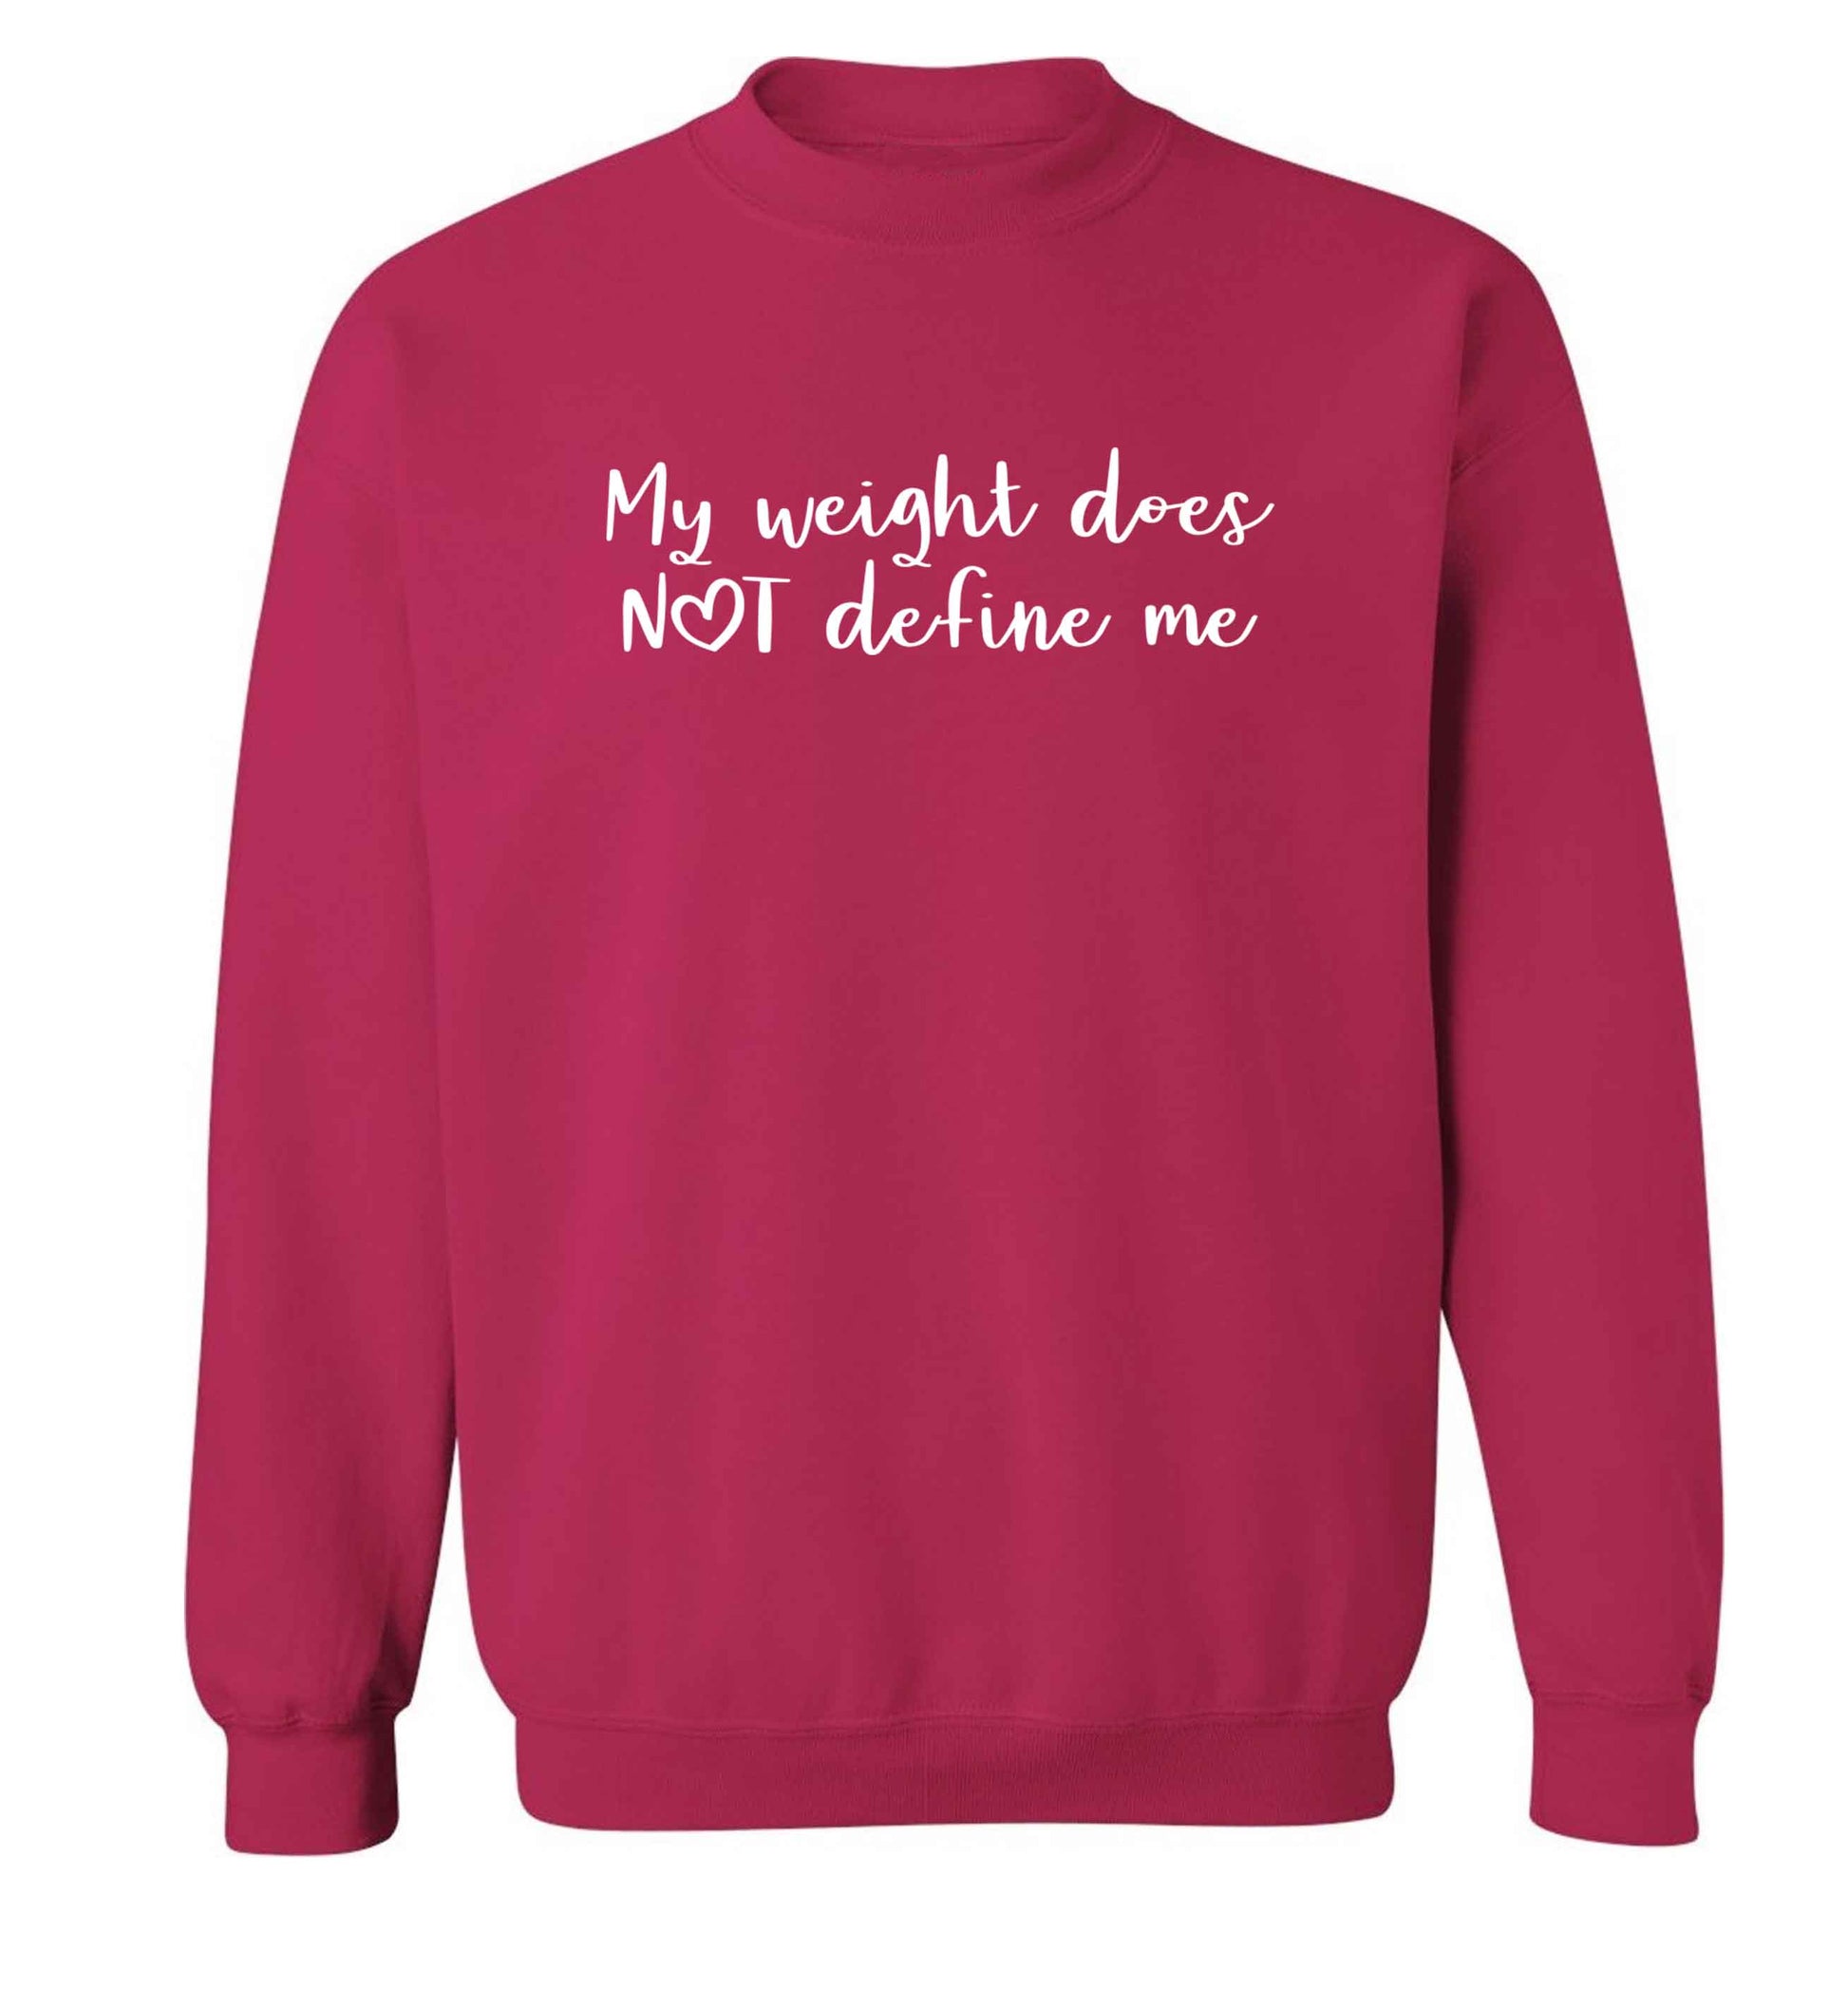 My weight does not define me adult's unisex pink sweater 2XL